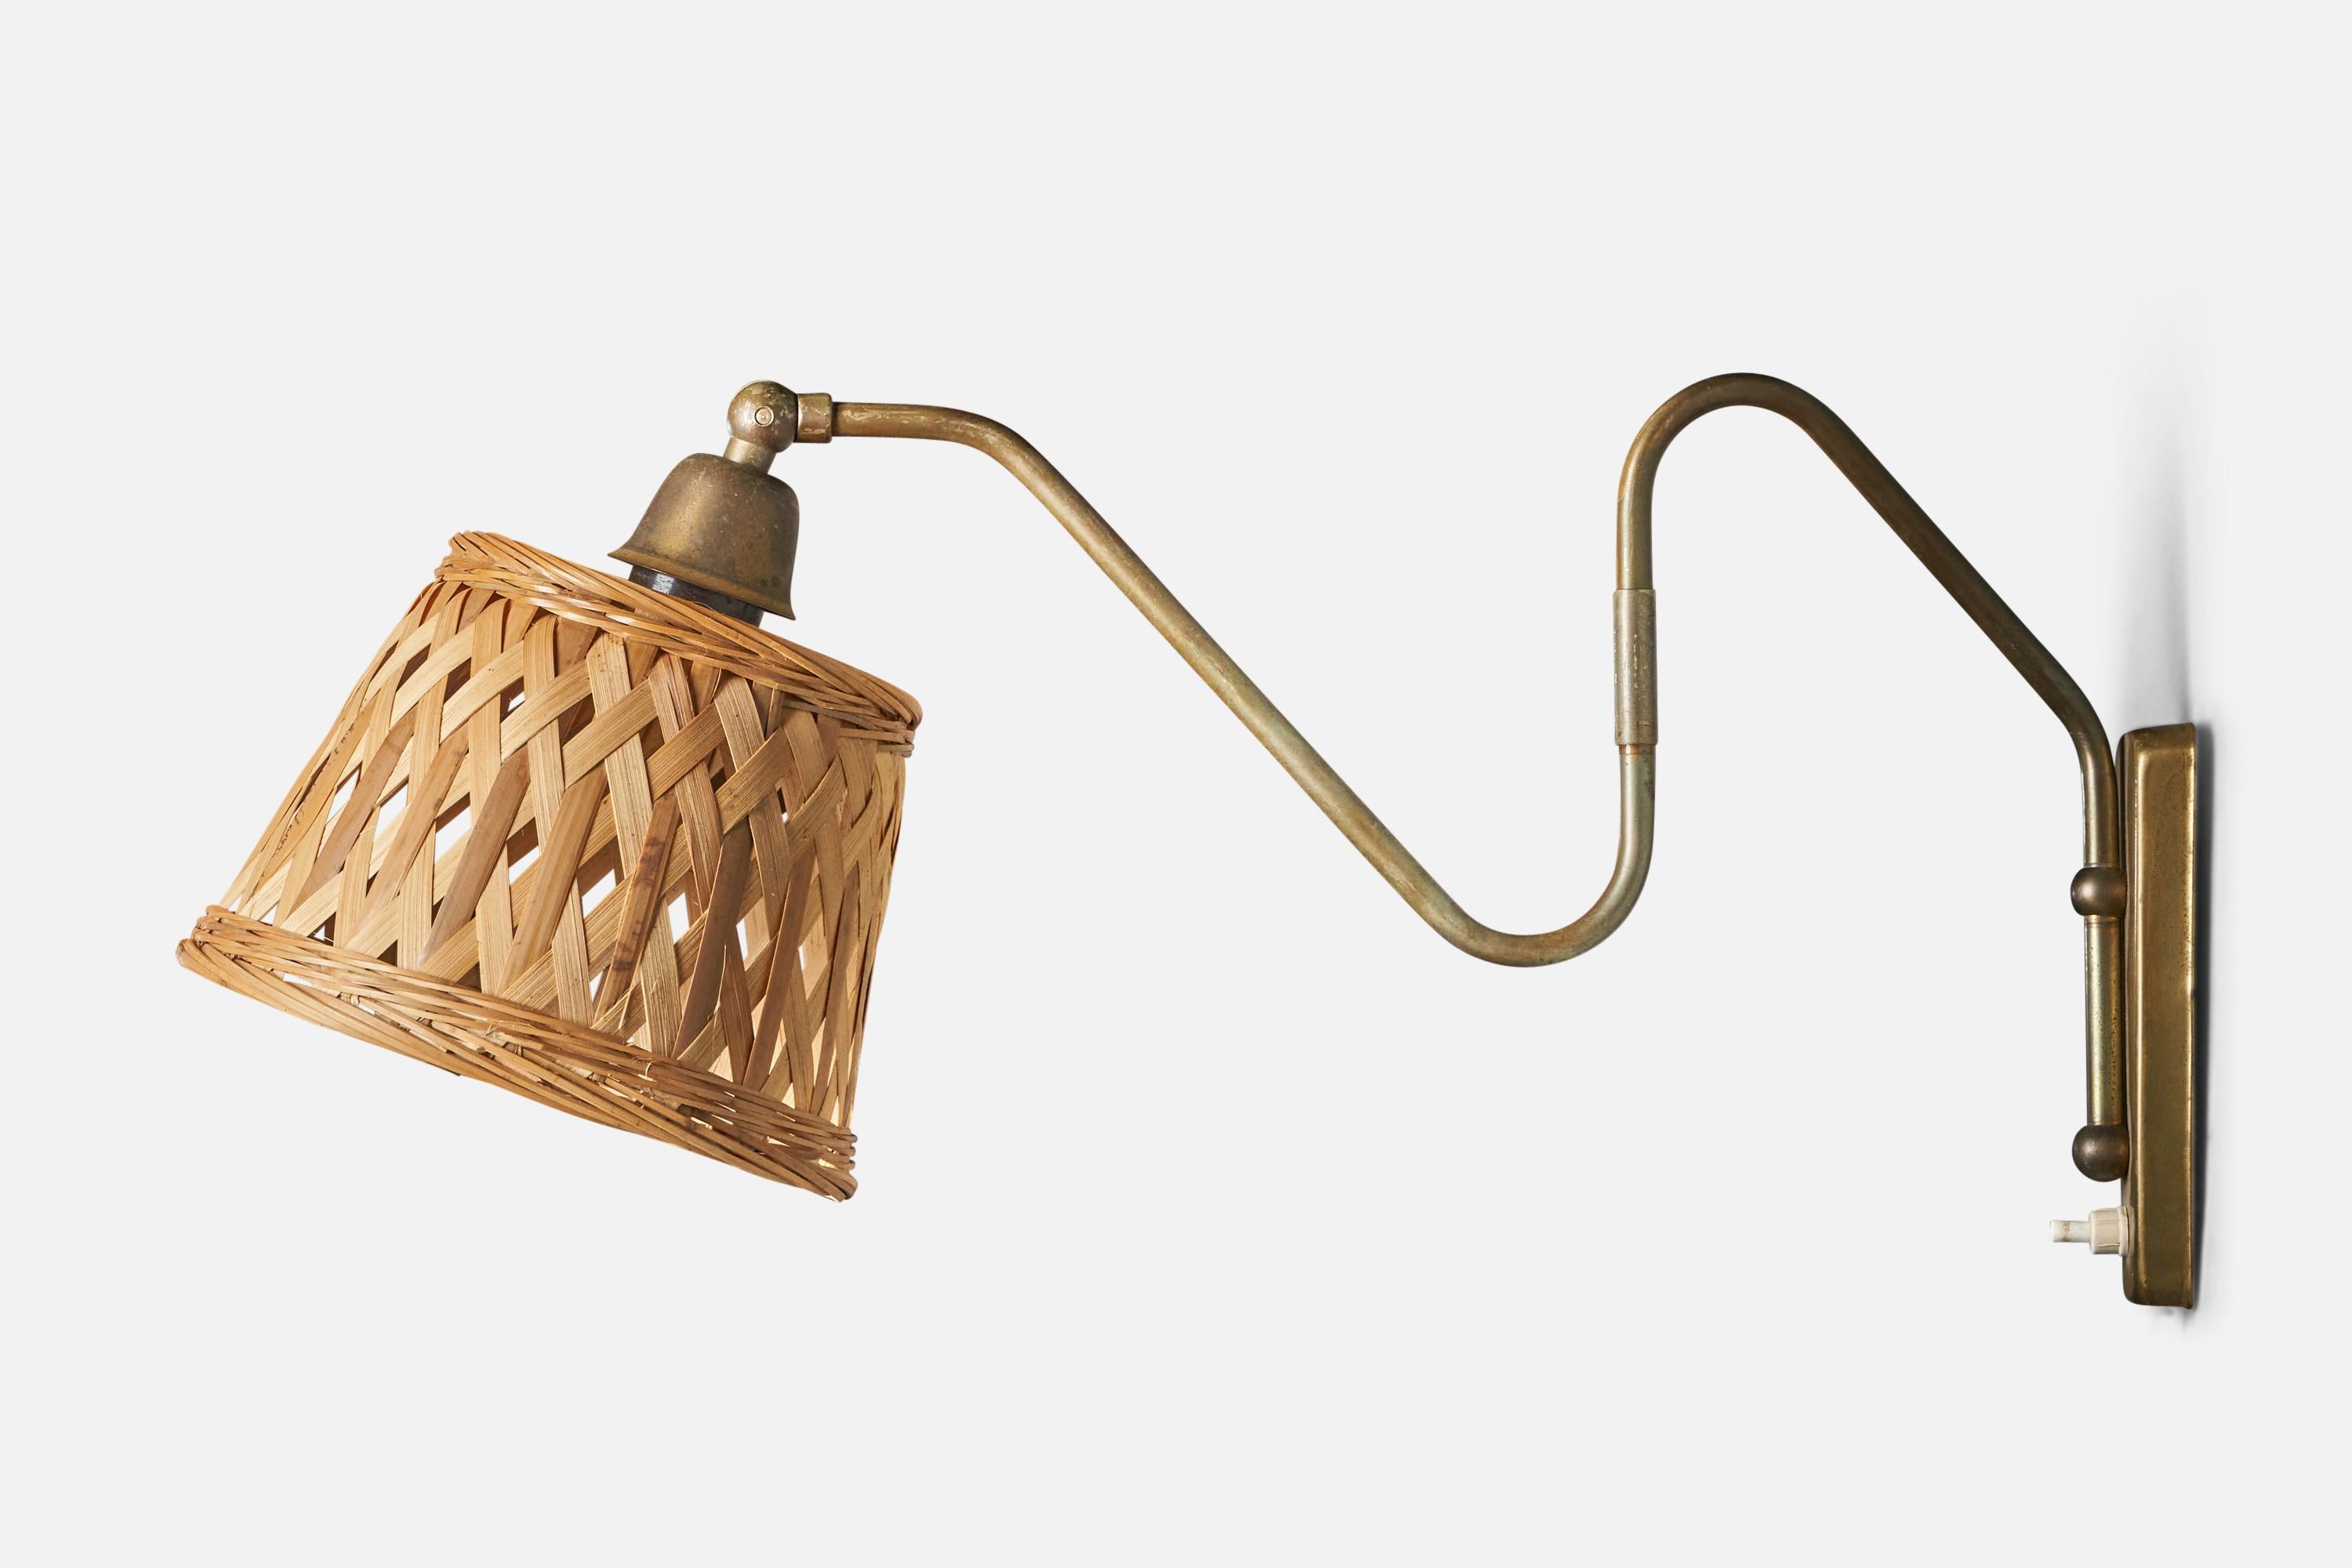 An adjustable brass and rattan wall light, designed and produced in Denmark, 1940s.

Overall Dimensions (inches): 9